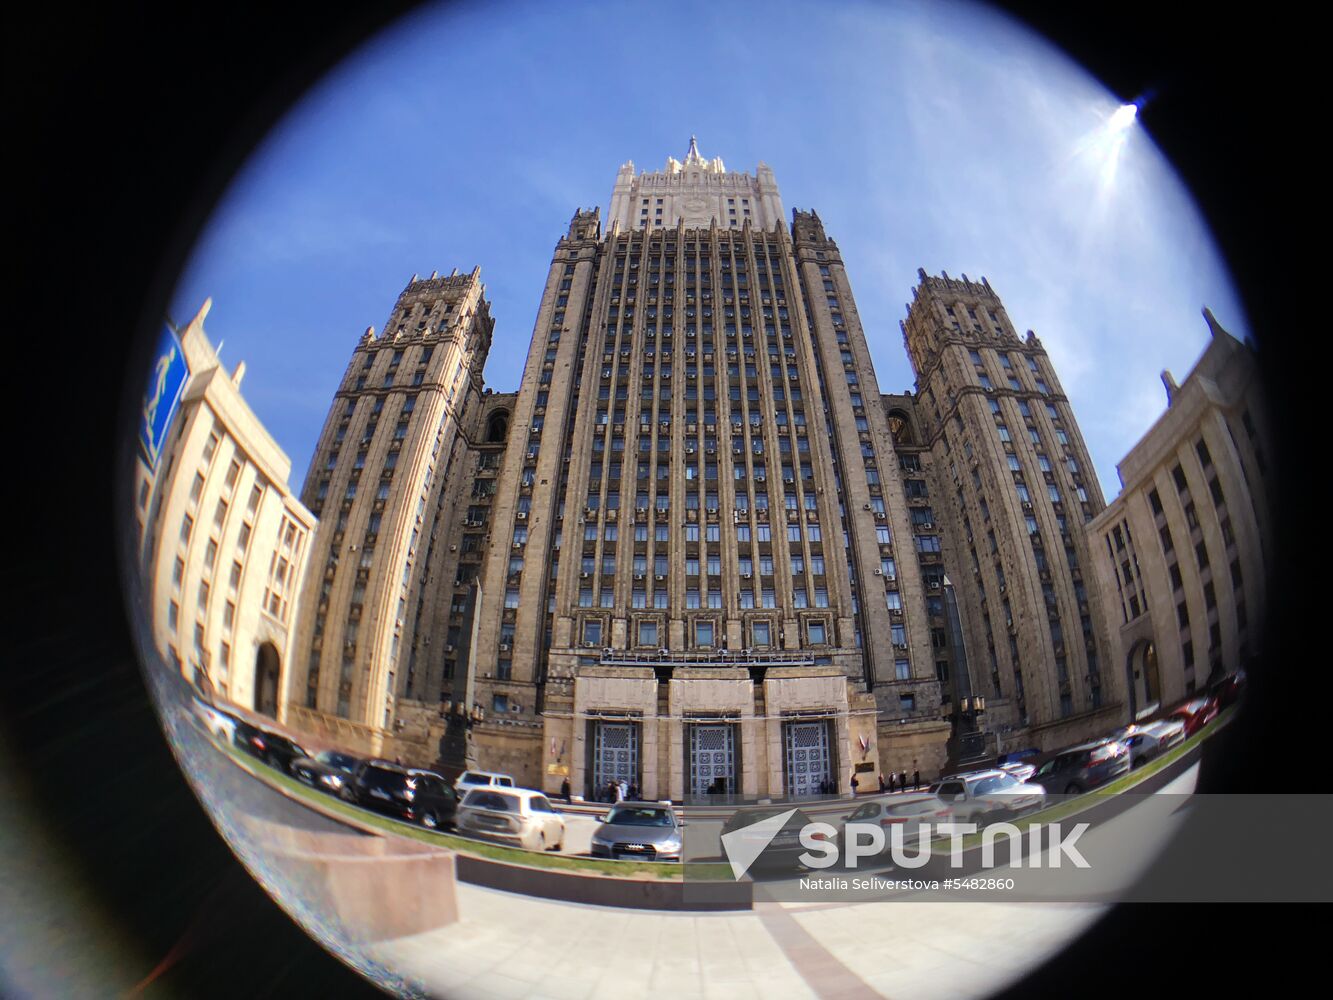 Russian Foreign Ministry